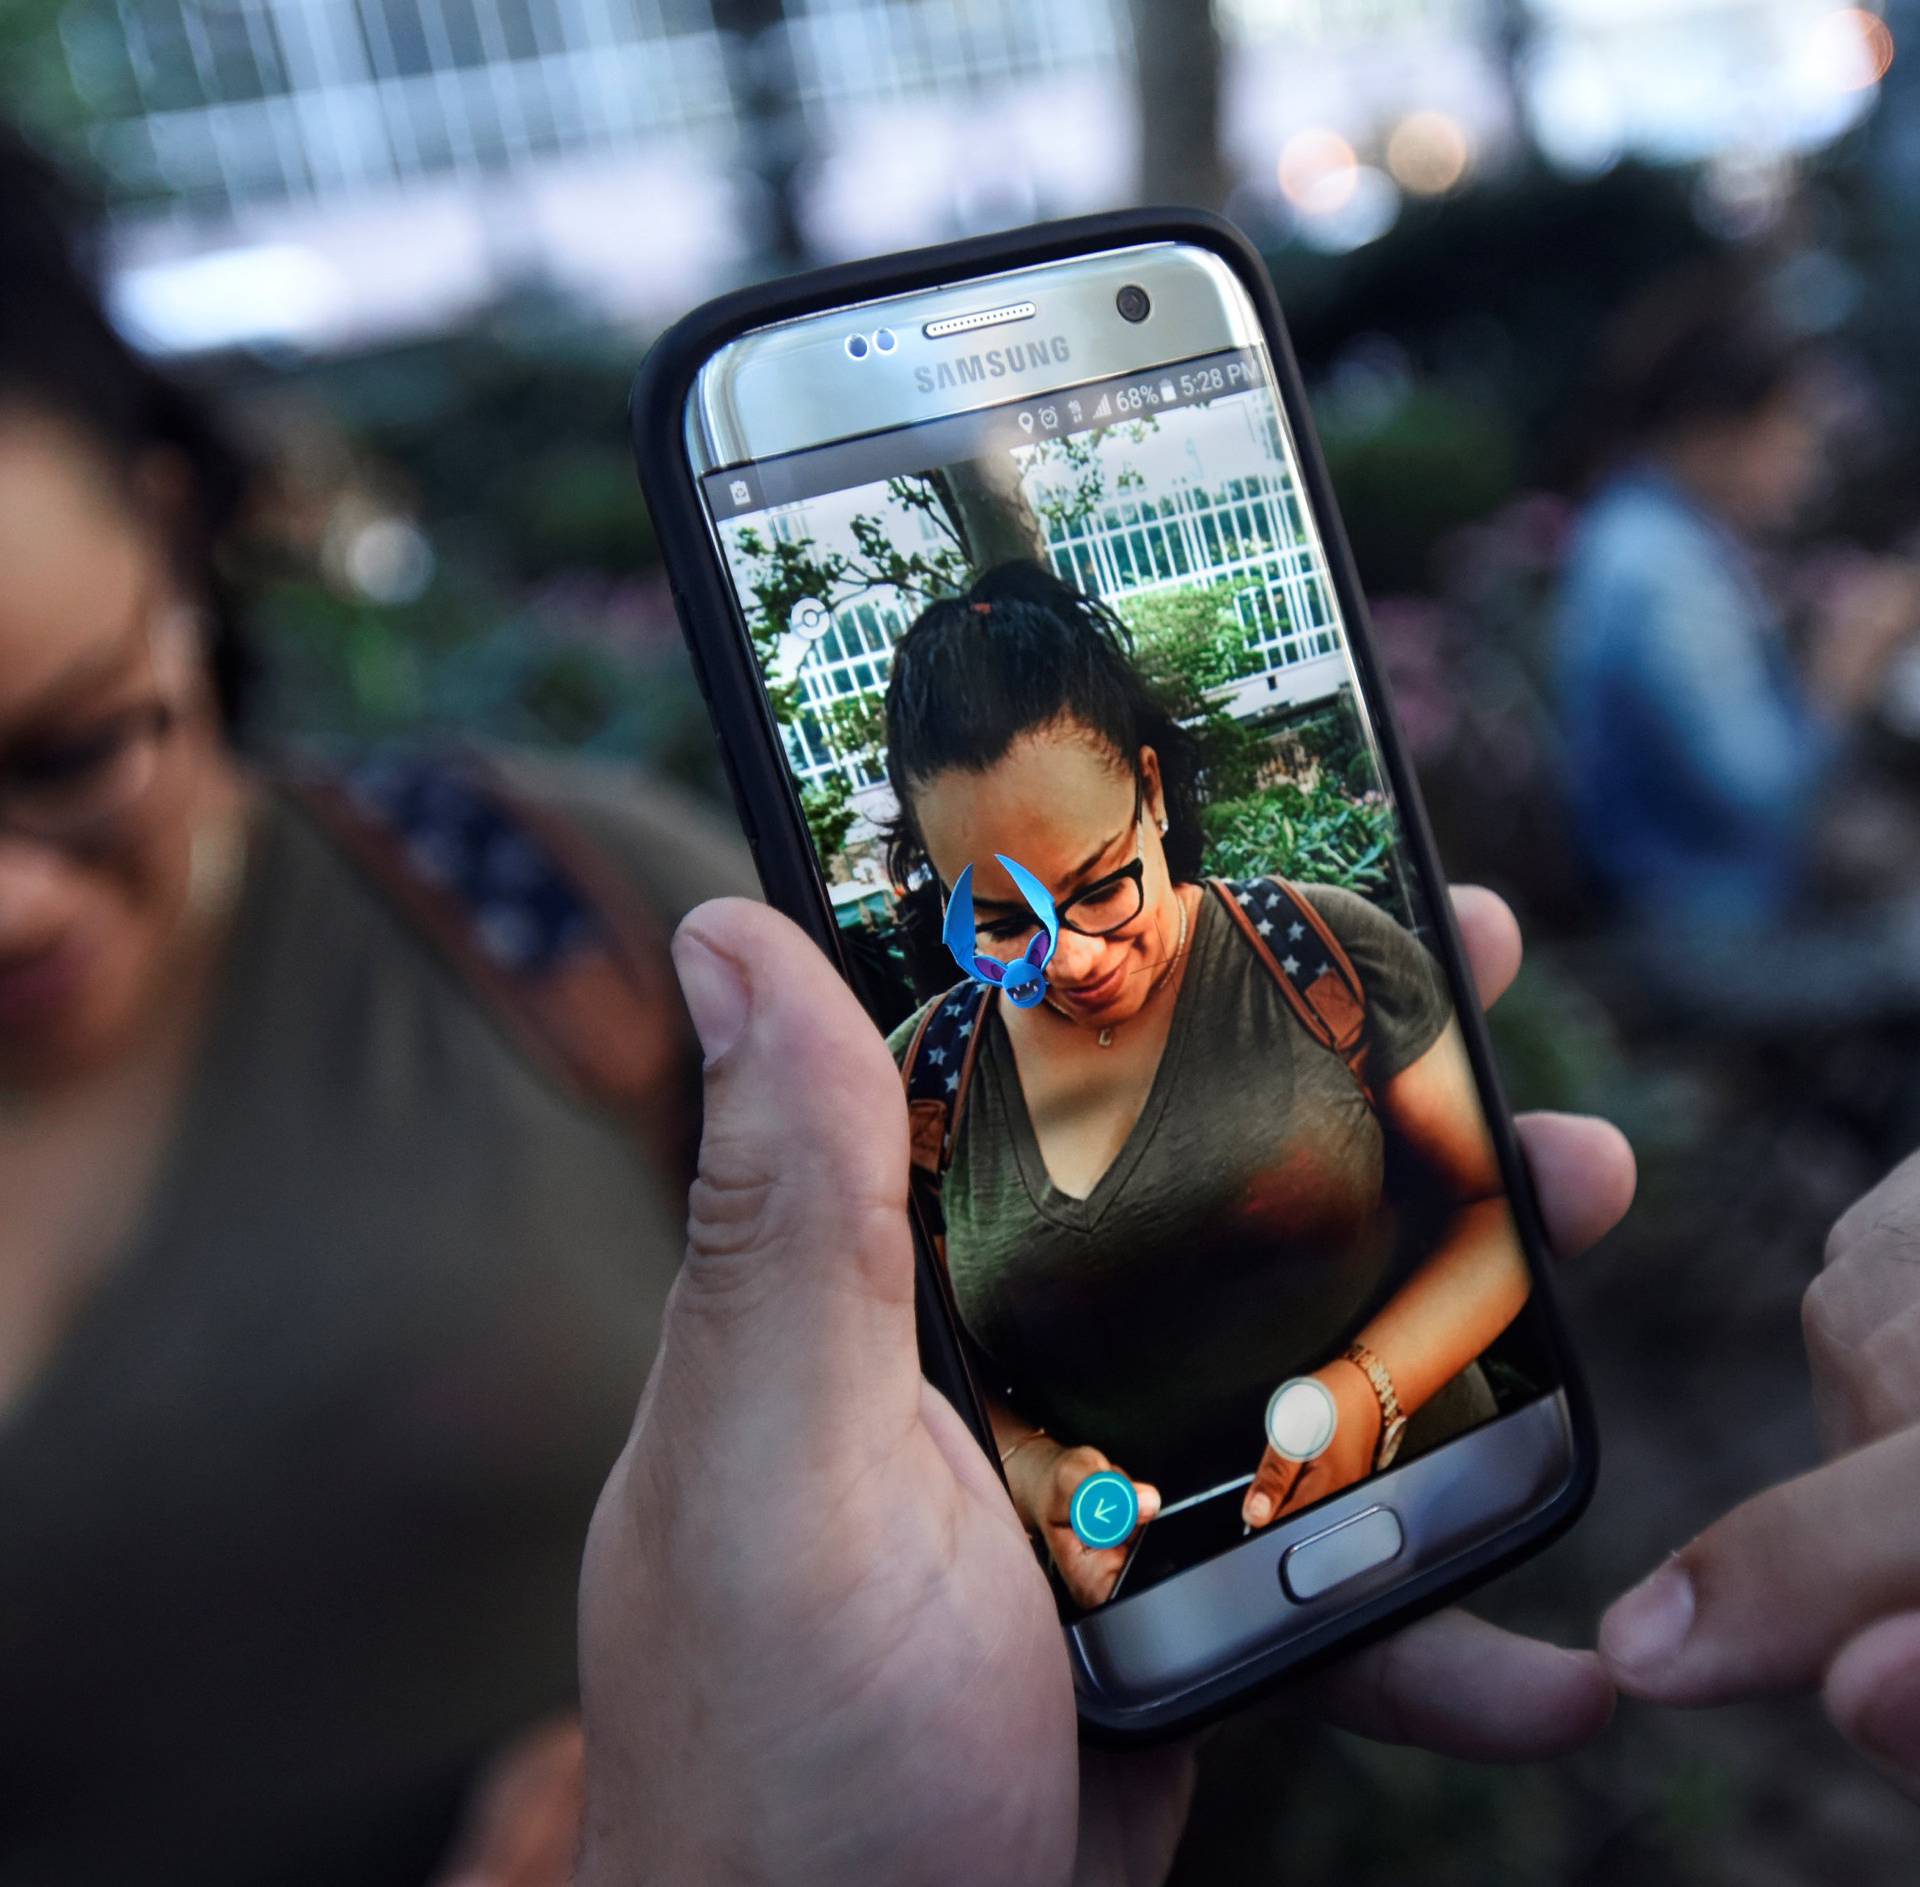 A Pokemon appears on the screen next to a woman as a man plays the augmented reality mobile game "Pokemon Go" by Nintendo in Bryant Park in New York City